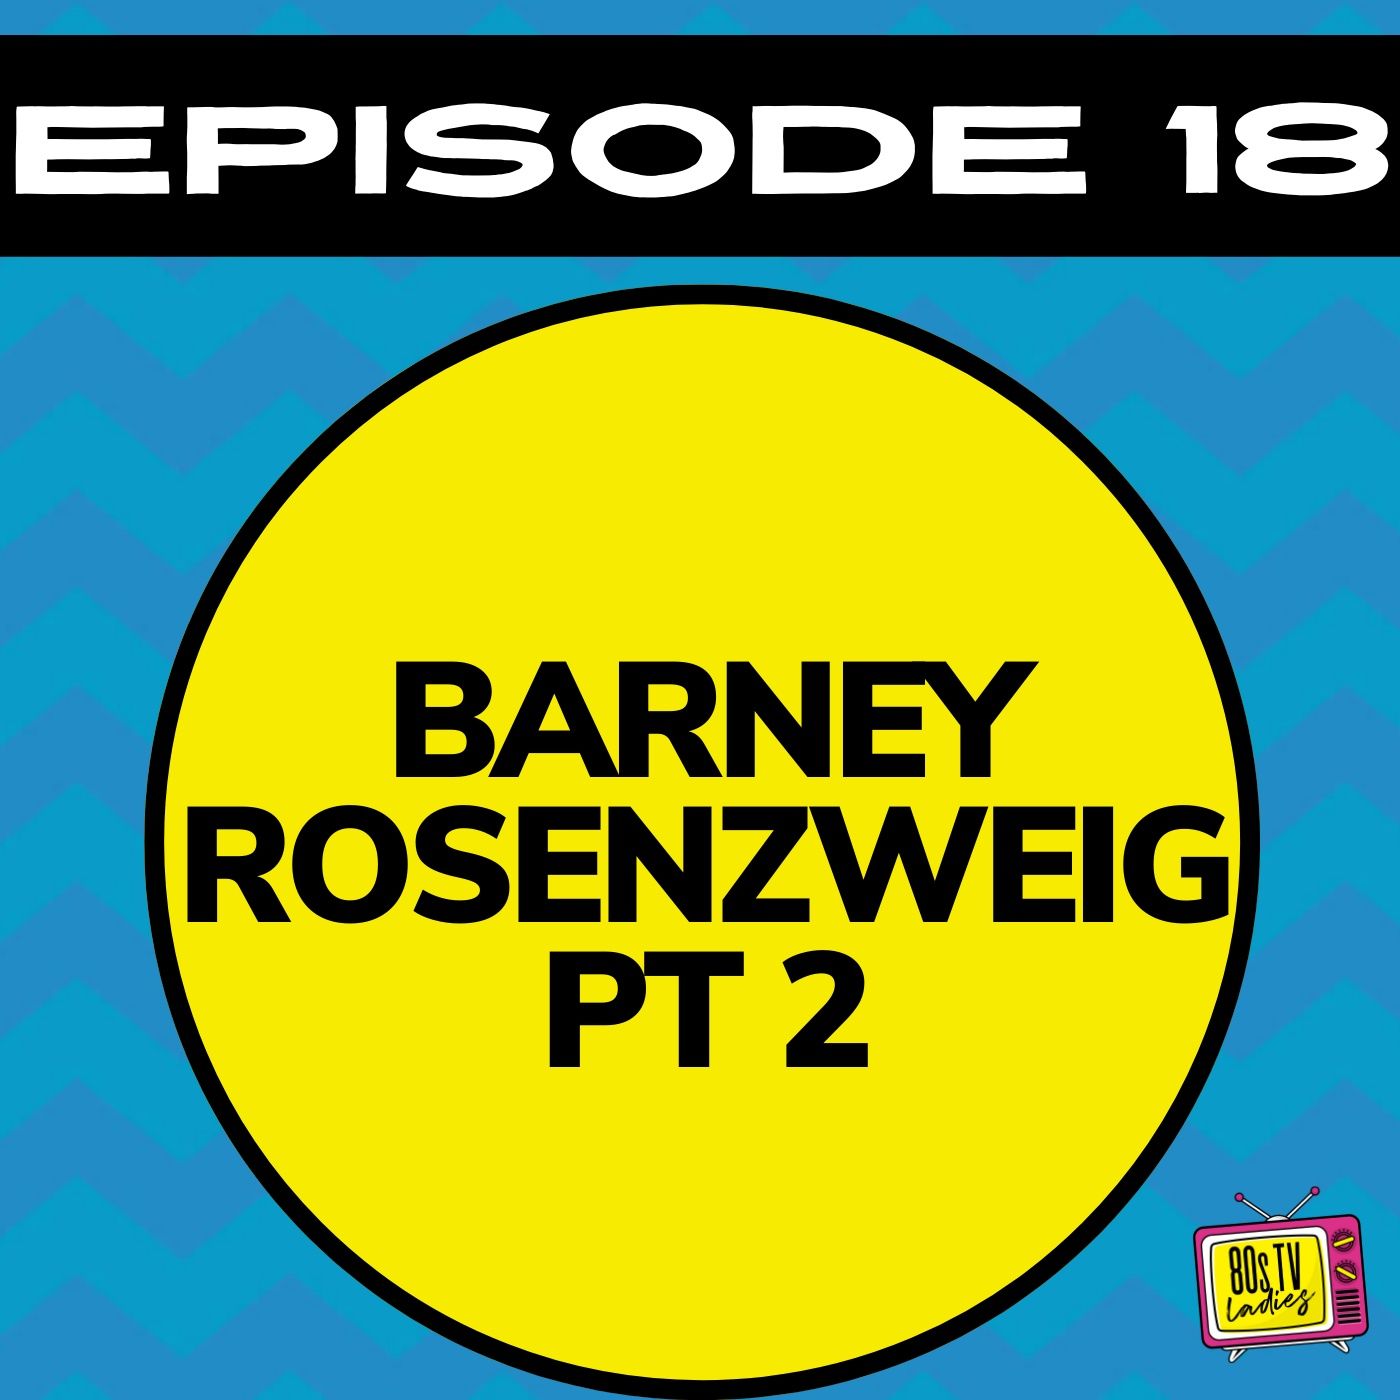 Cagney & Lacey & Barney Rosenzweig, Part 2